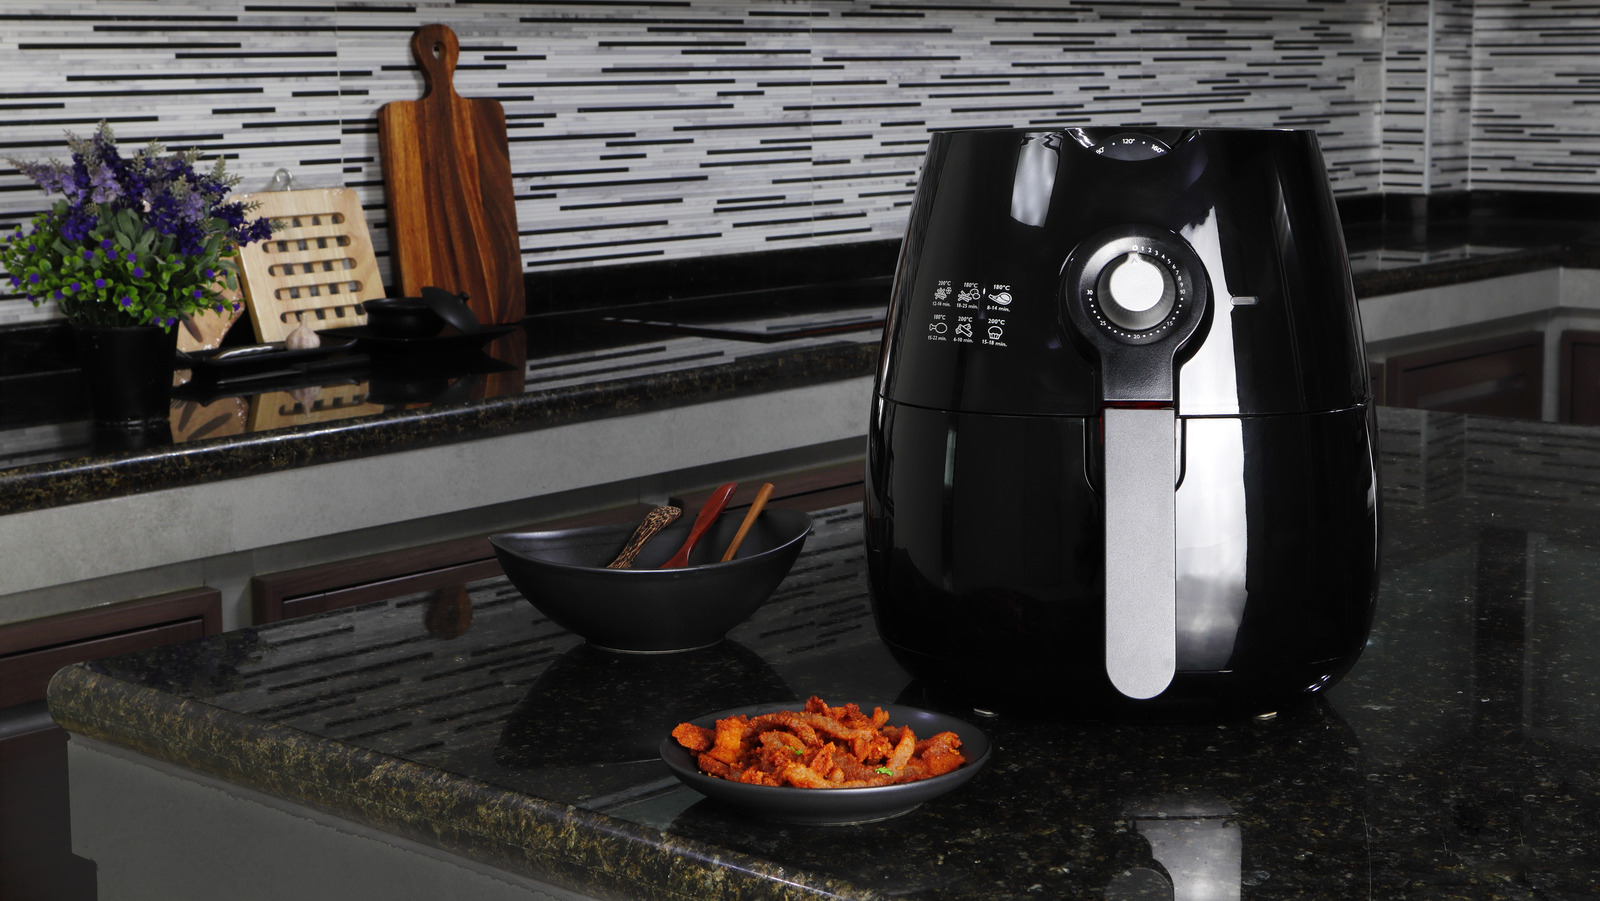 This Is the #1 Mistake to Avoid When Using an Air Fryer, According to TikTok